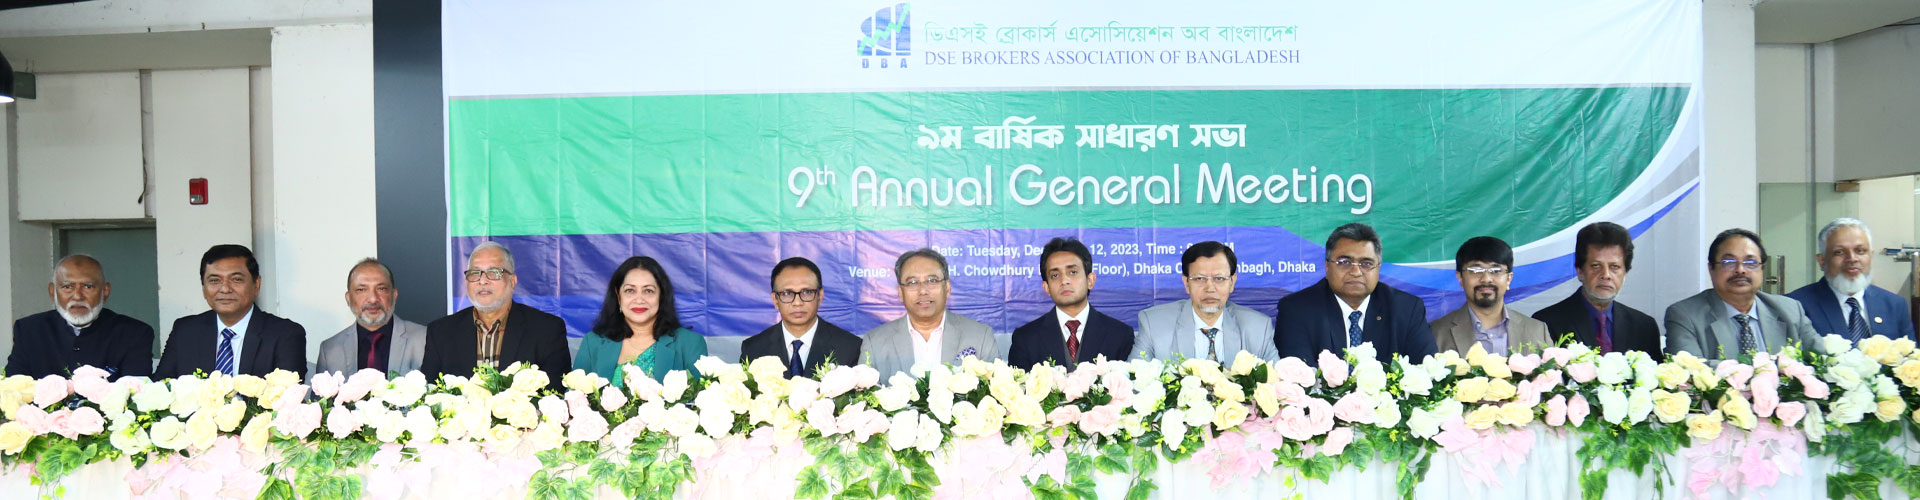 9th Annual General Meeting